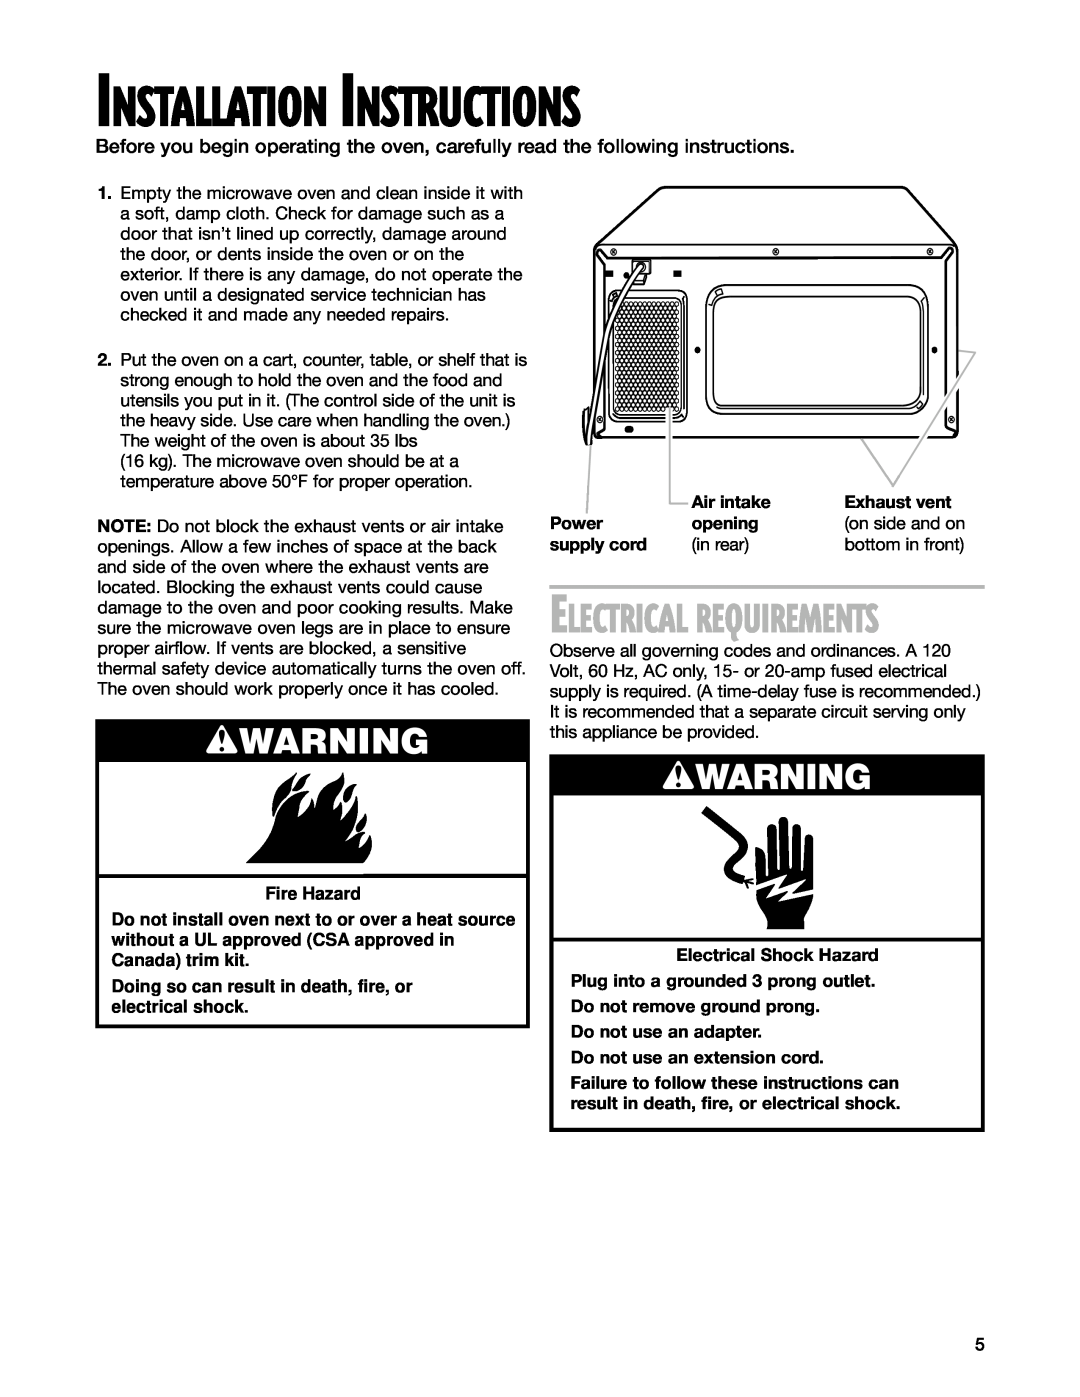 Whirlpool MT1111SK Fire Hazard, Doing so can result in death, fire, or electrical shock, Installation Instructions 